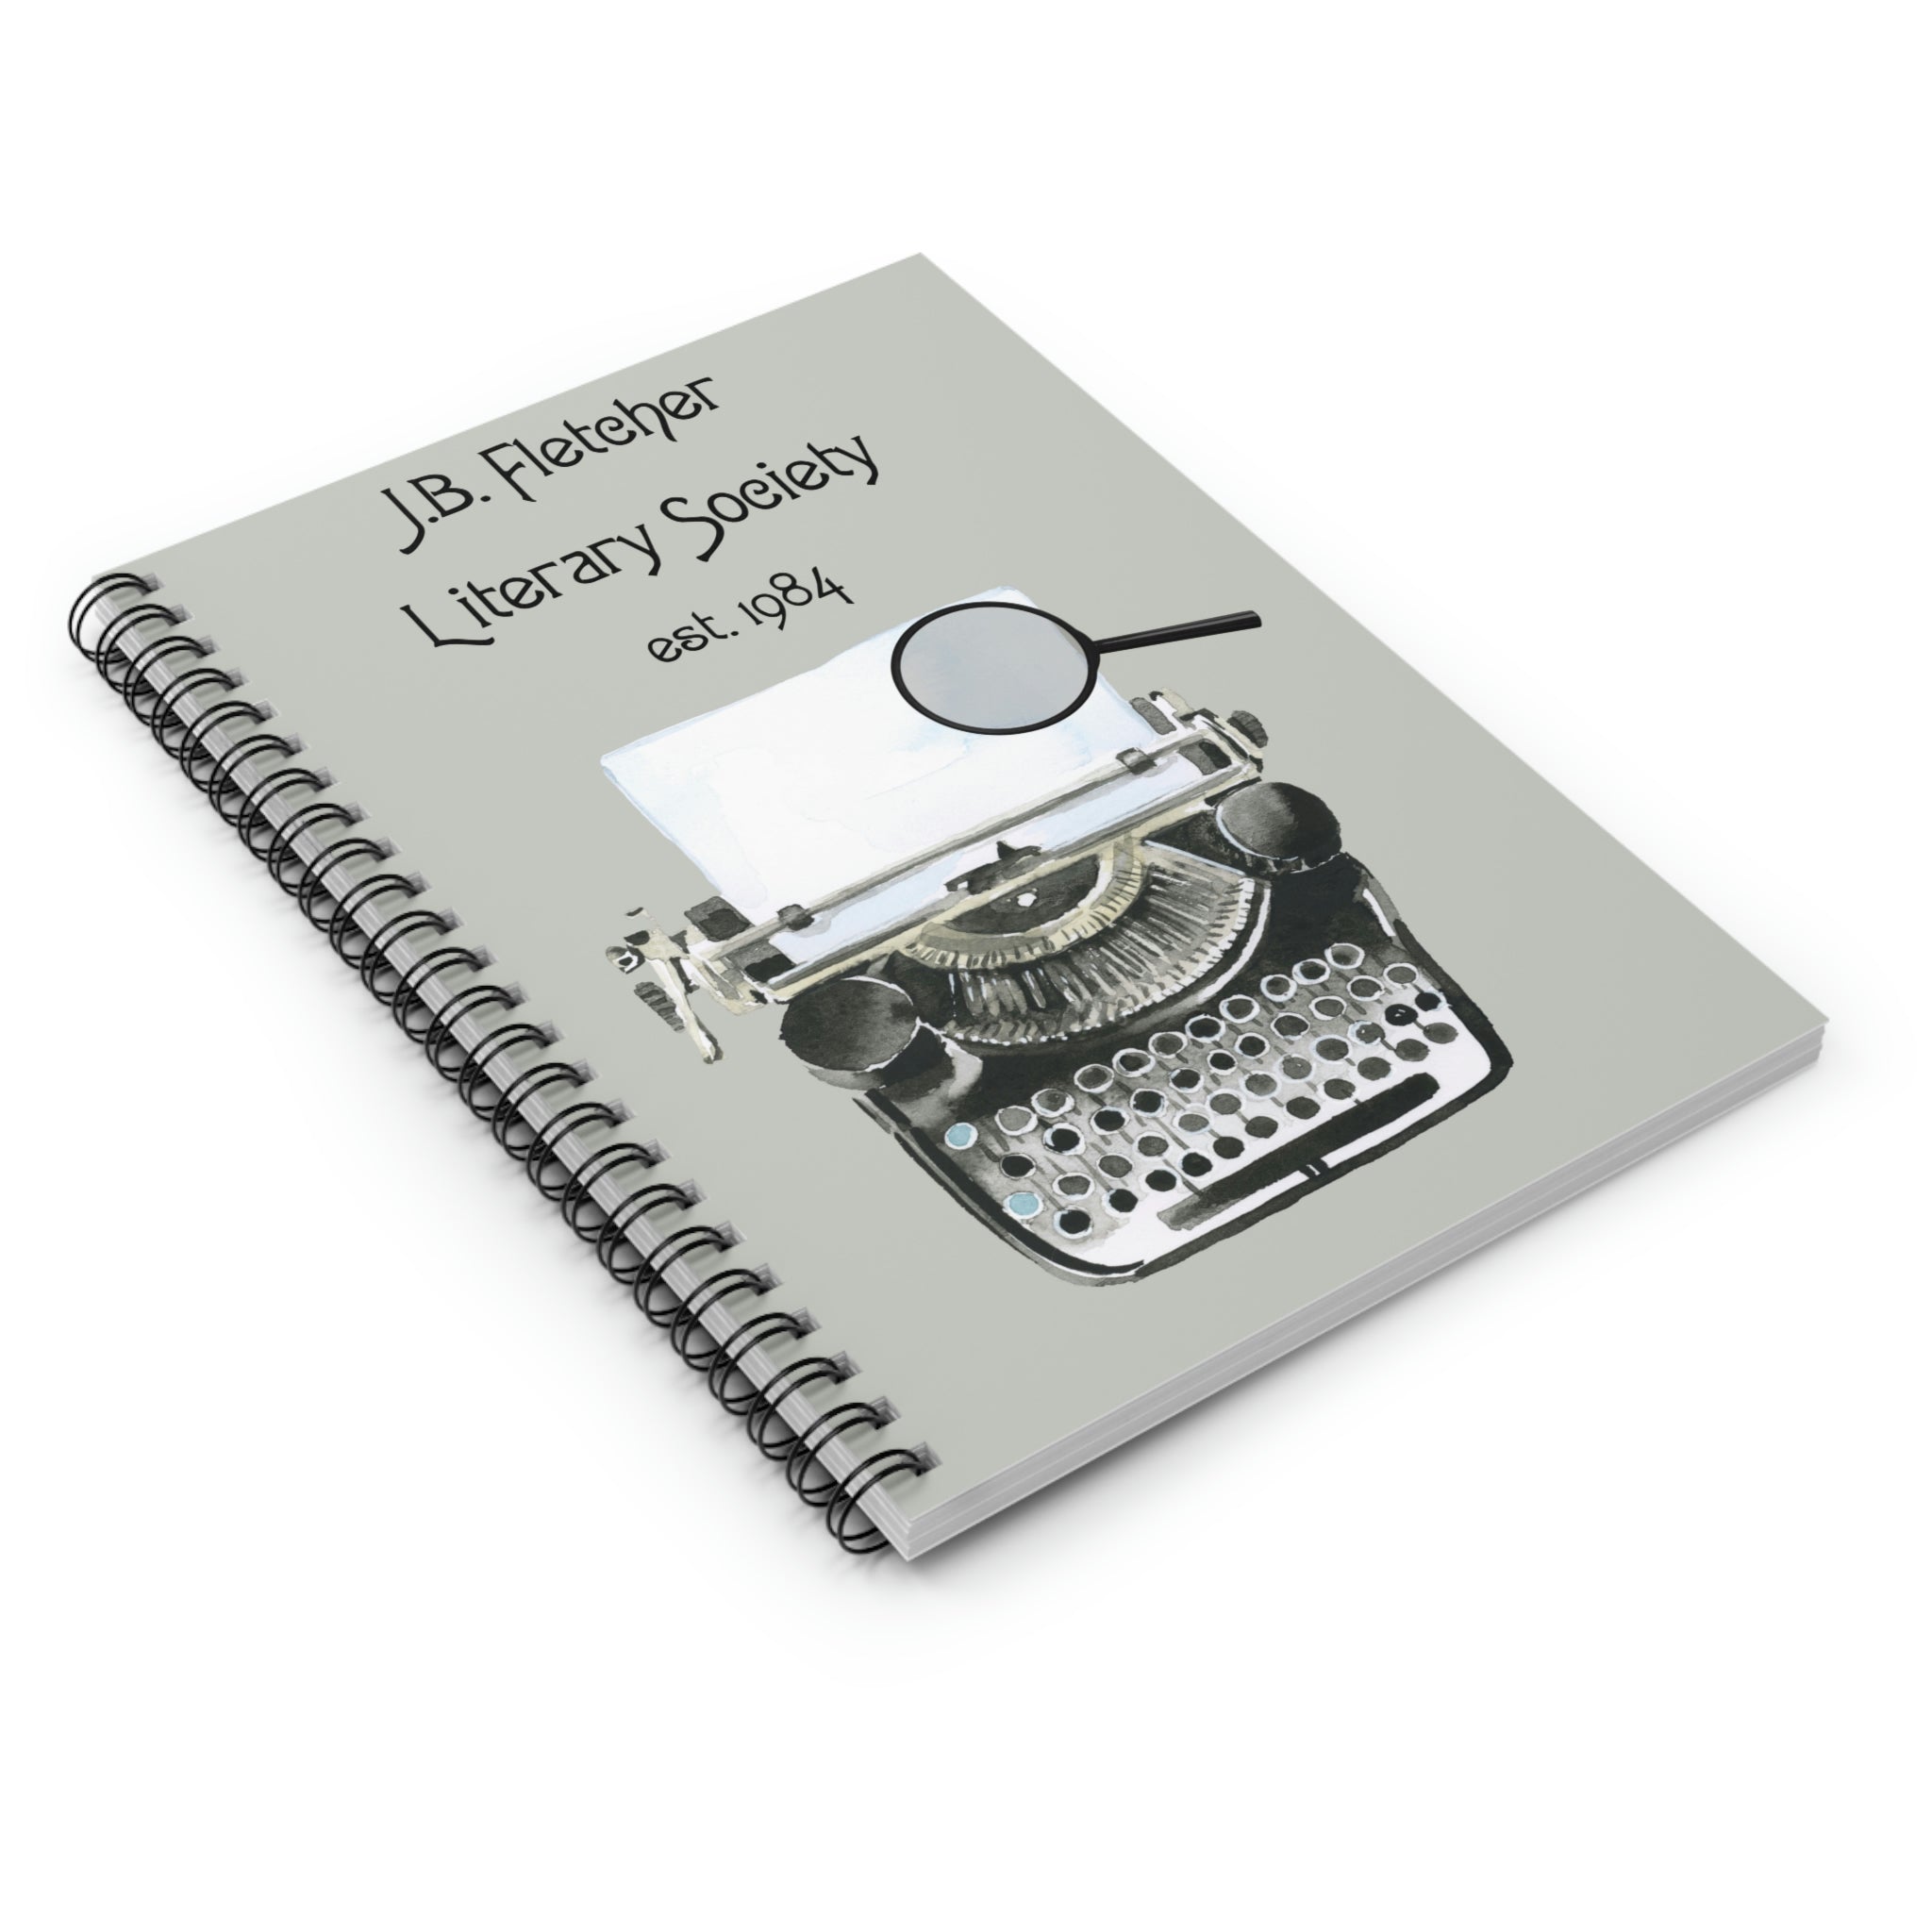 J.B. Fletcher Literary Society Ruled Line Notebook,  Laying flat on table